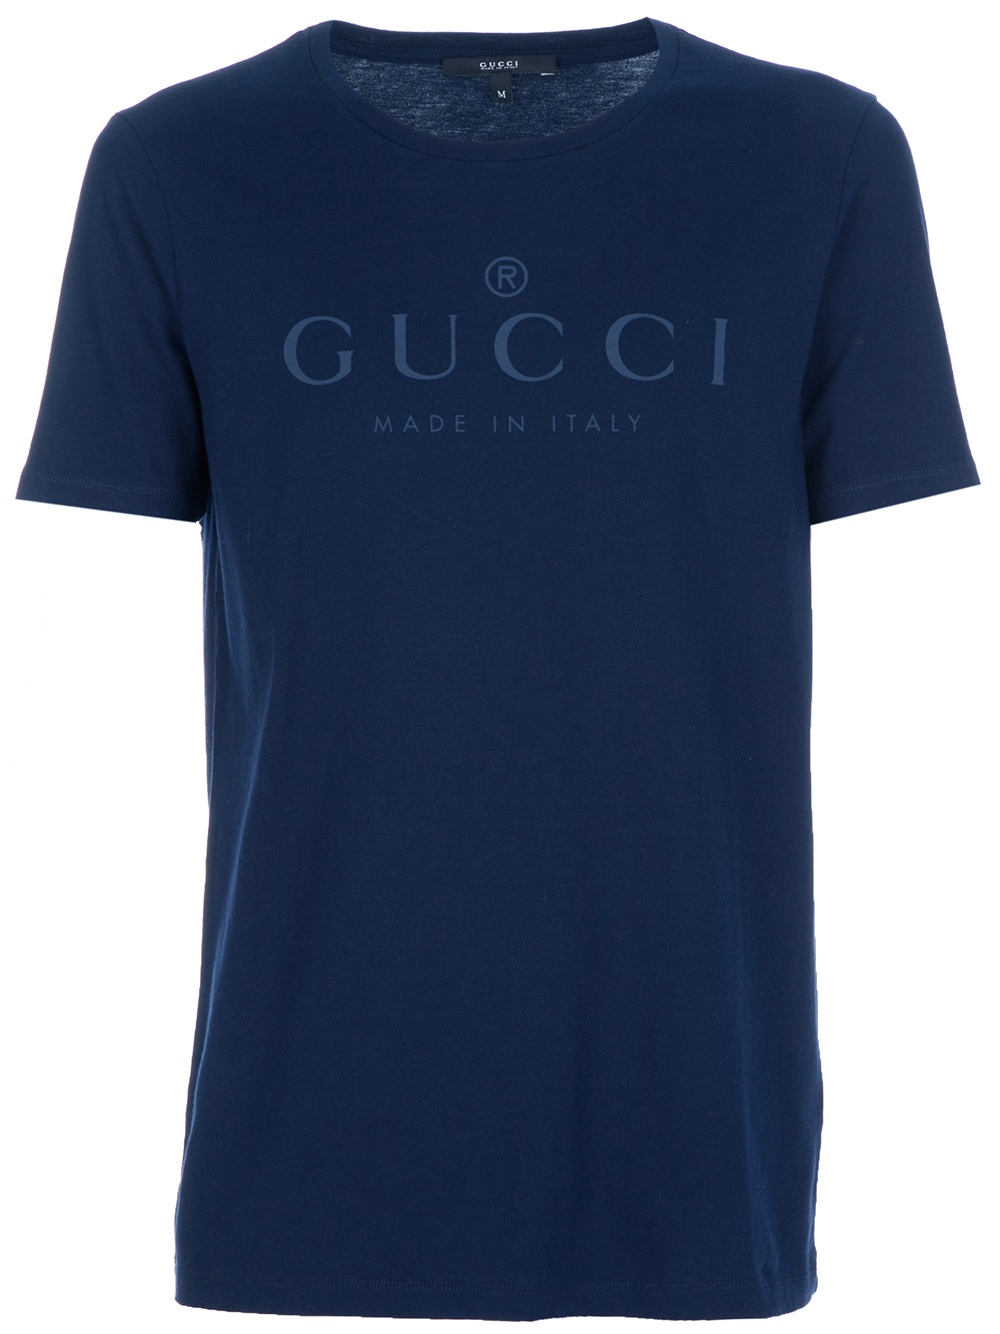 Gucci Logo T-shirt in Blue for Men - Lyst